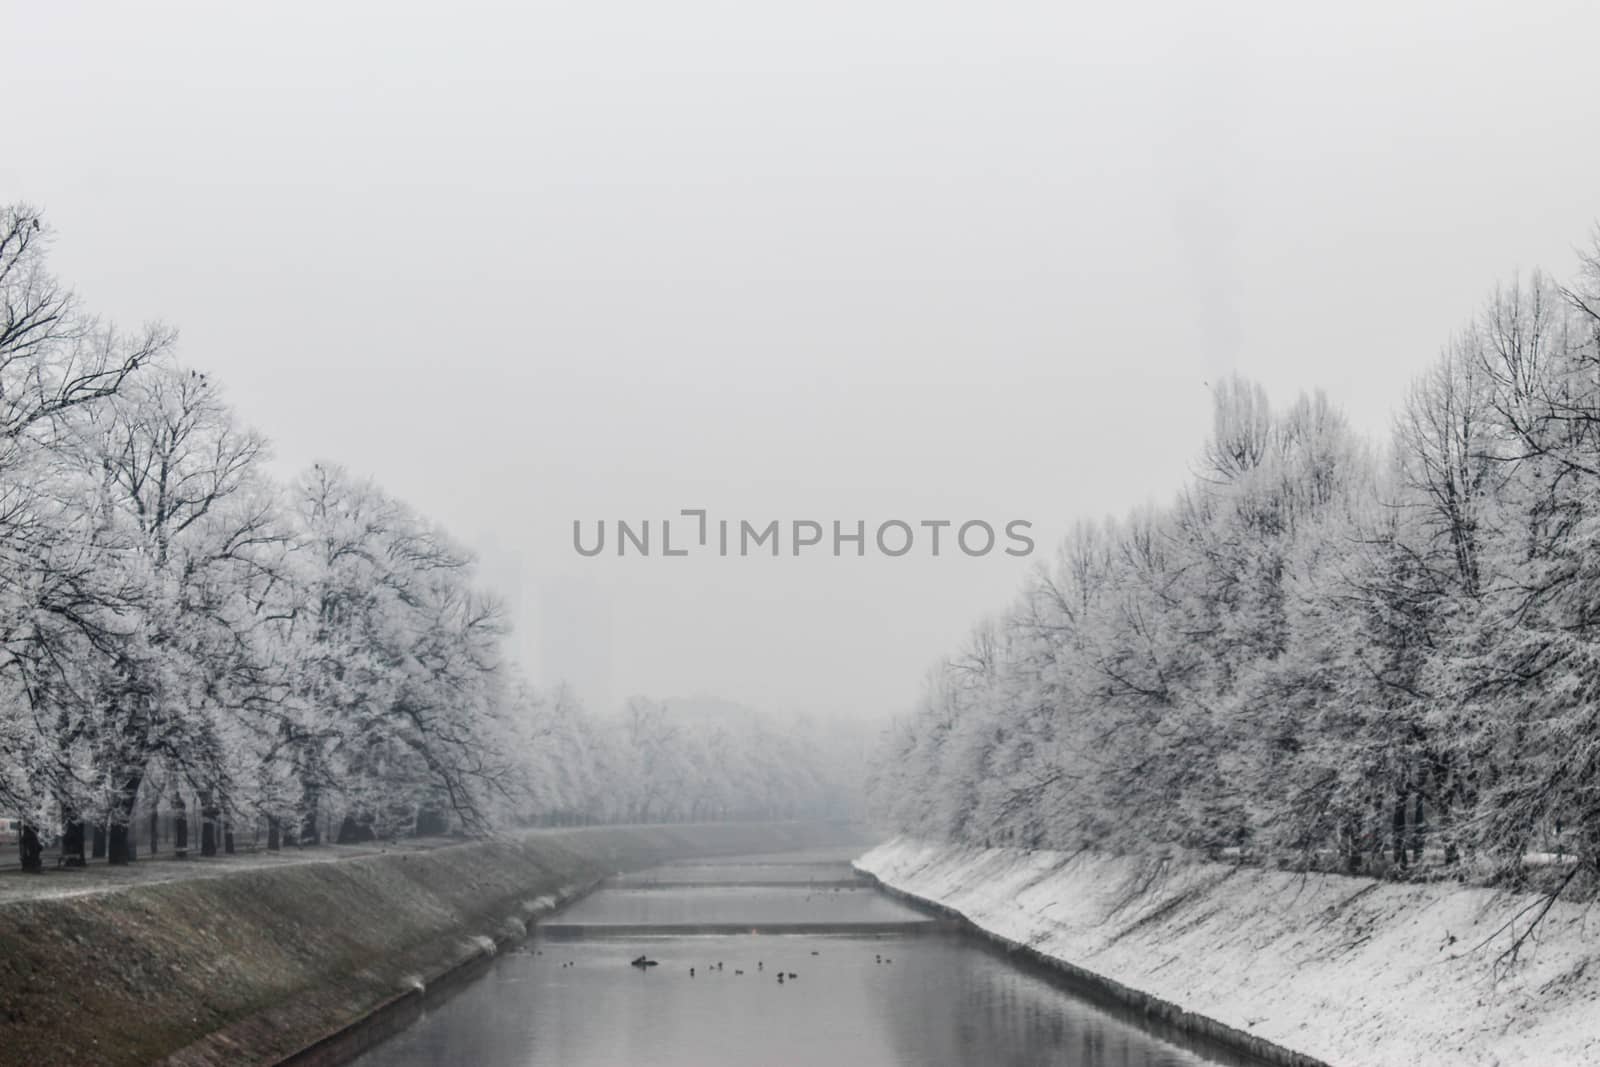 The Miljacka river in Sarajevo during the winter. In winter, Sarajevo has fog and pollution with little snow on the coast. by mahirrov